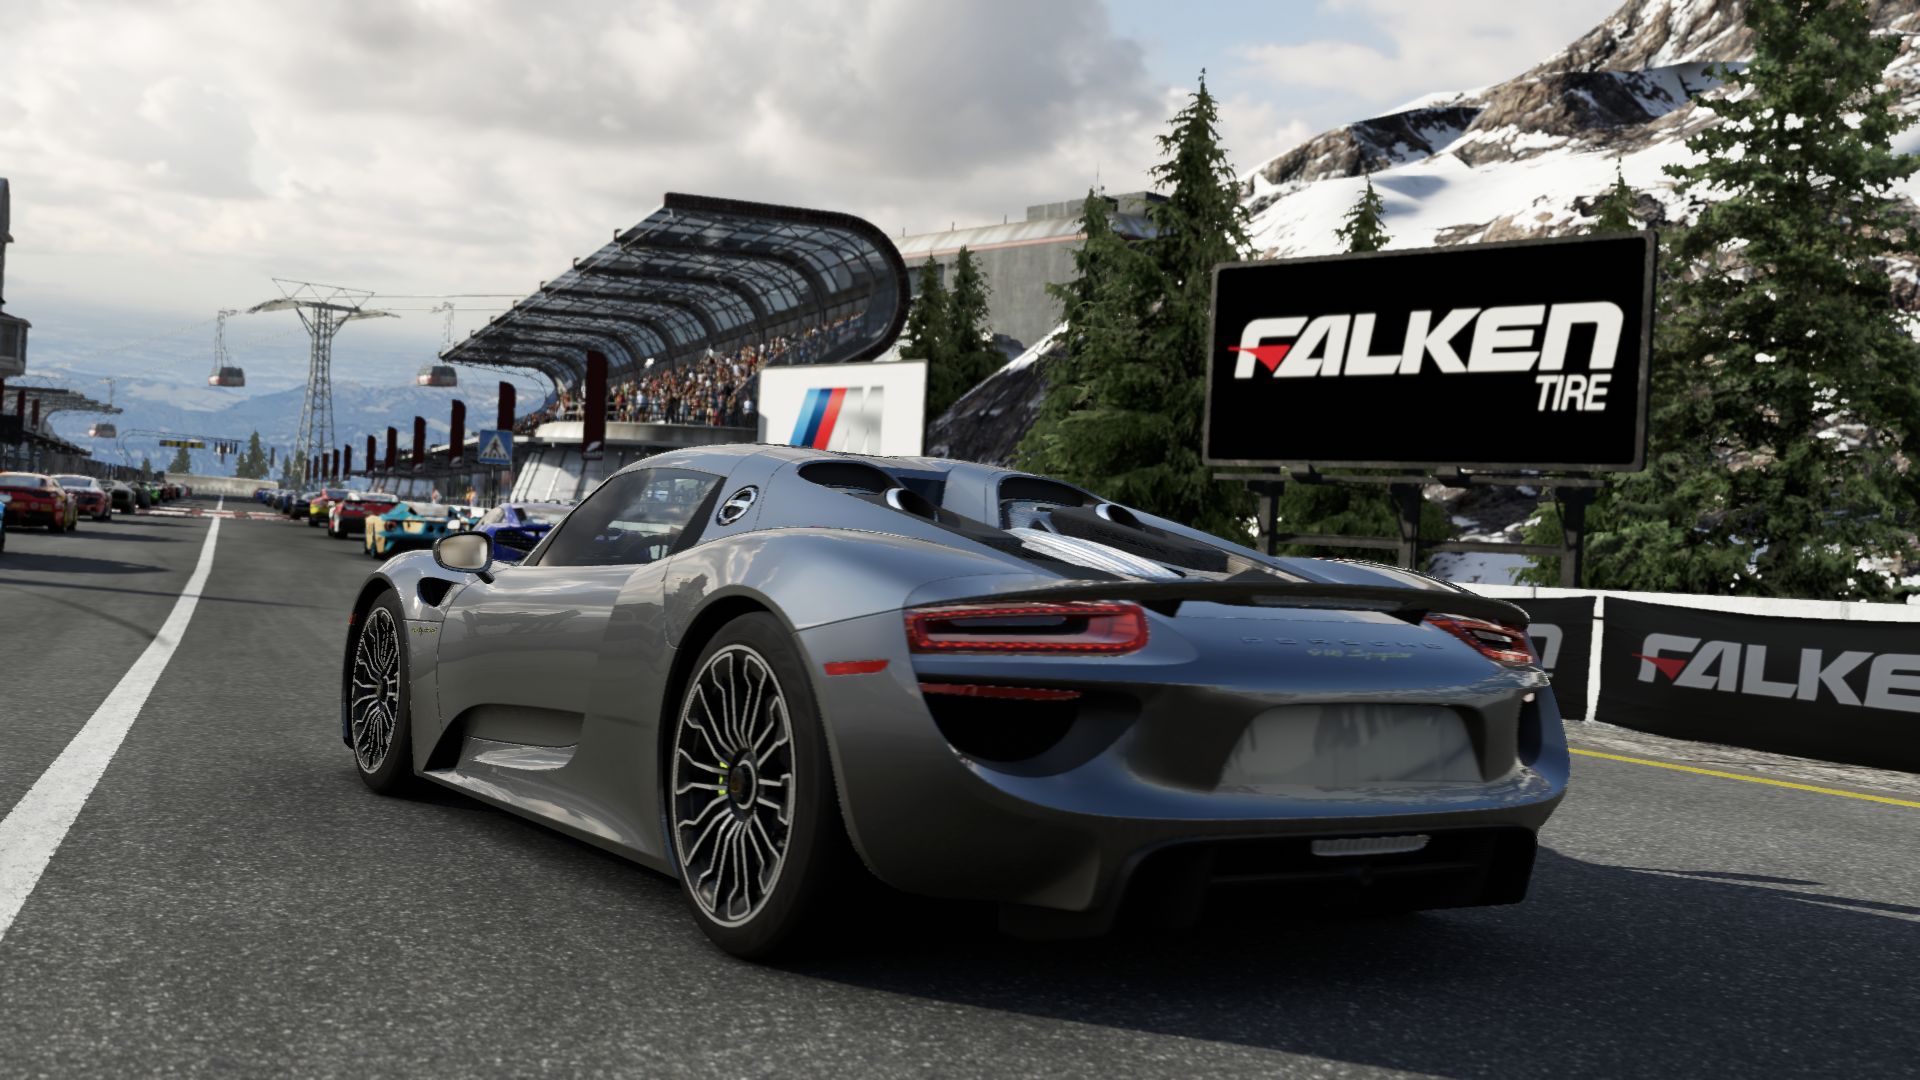  Forza Motorsport 6 HQ Background Wallpapers